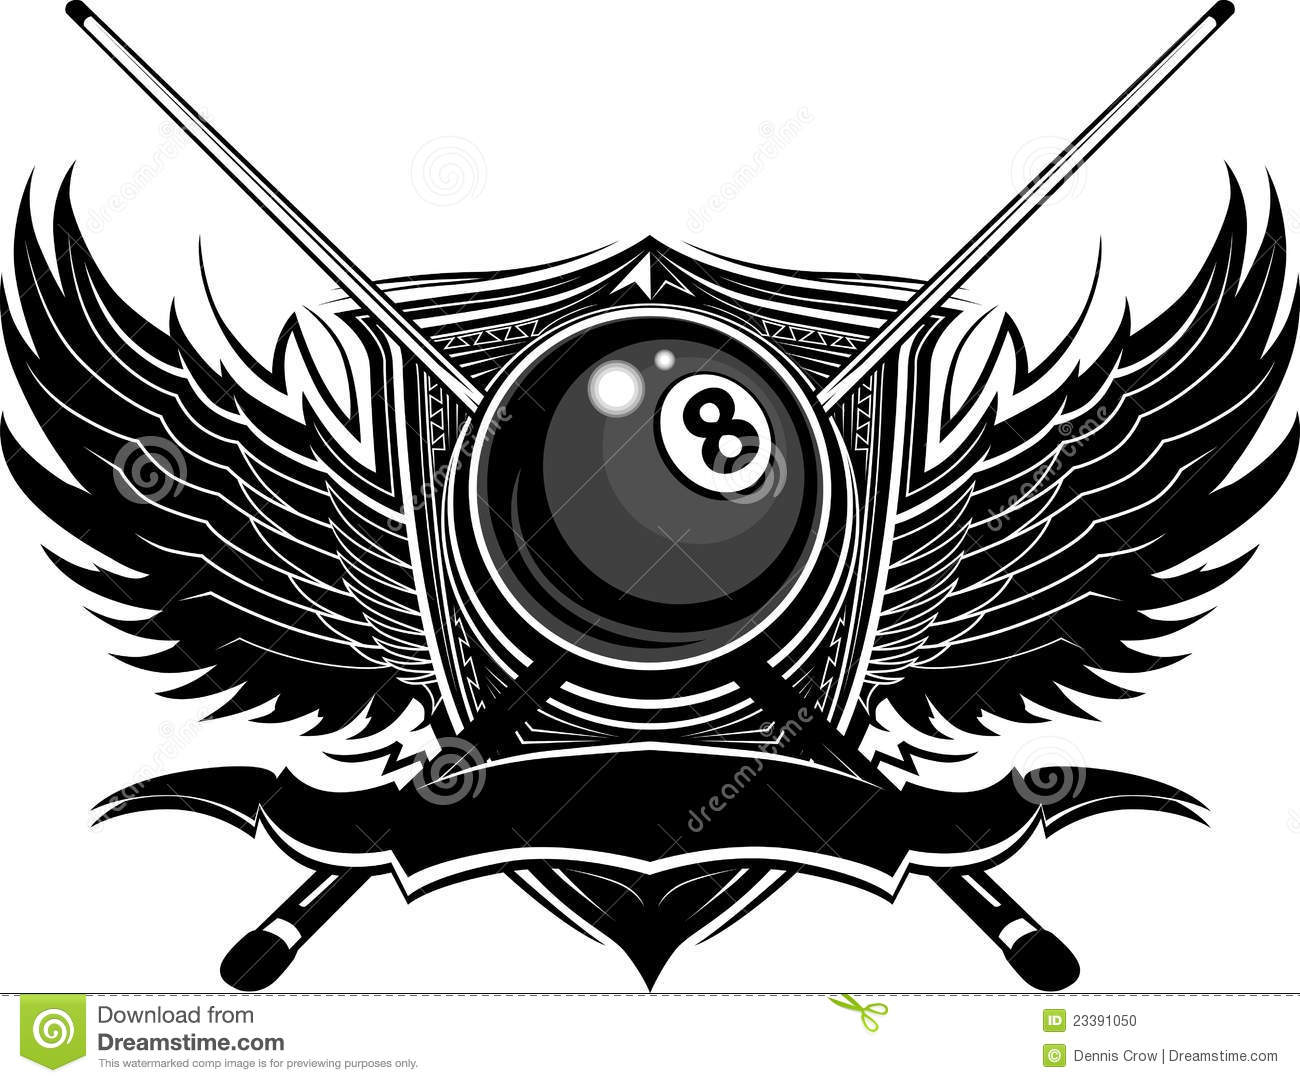 Billiards Eight Ball with Ornate Wings Stock Photo